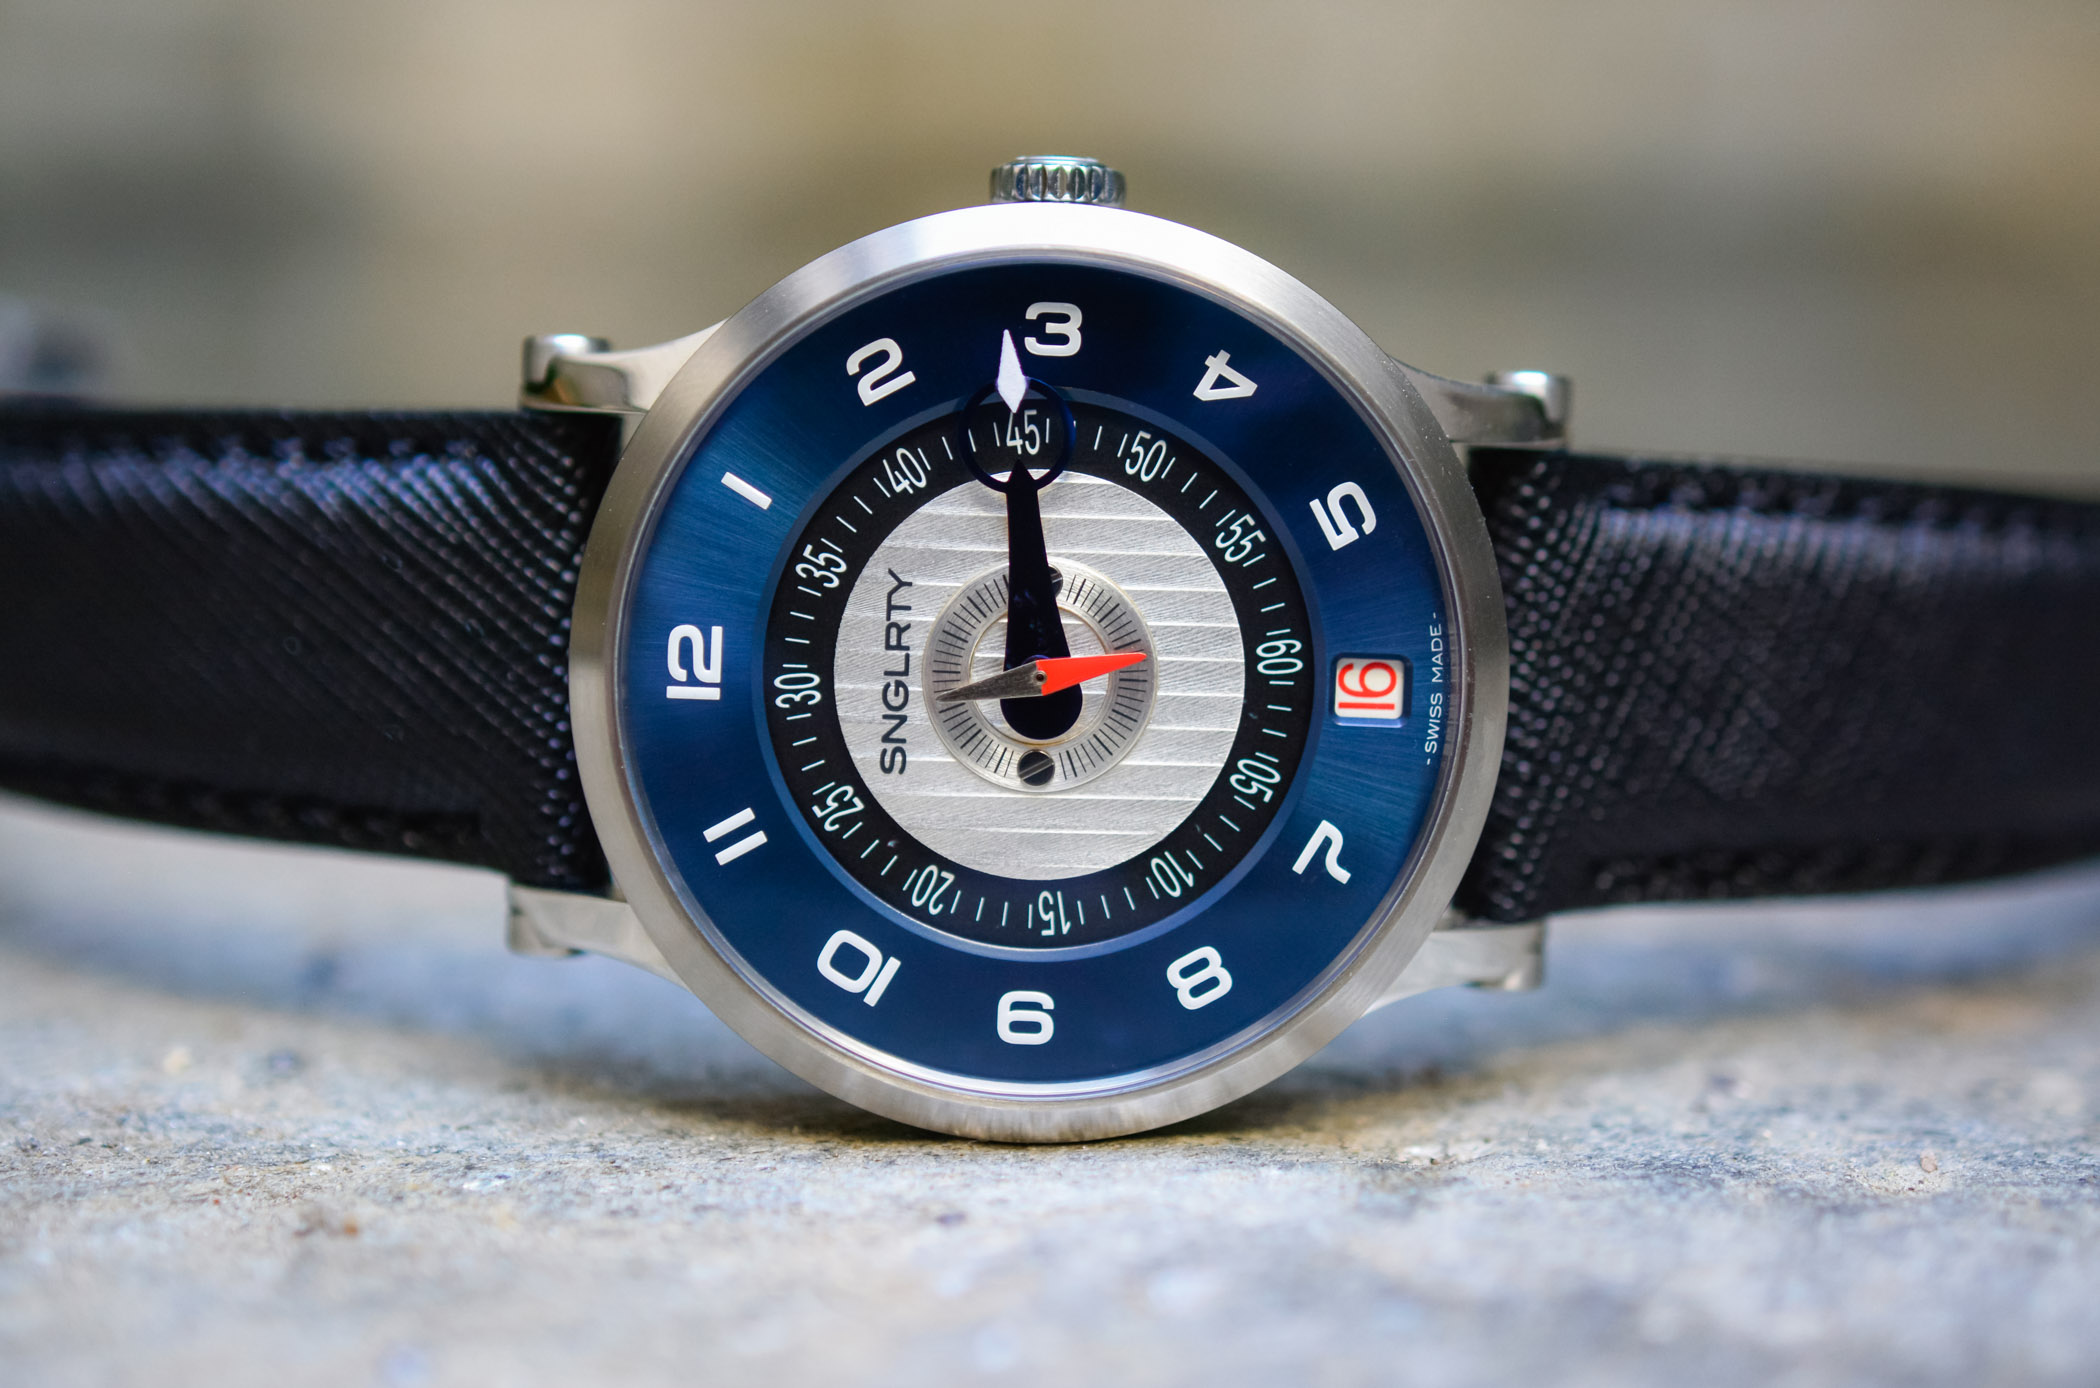 SNGLRTY Blue Steel OHI-4 patented display watch independent watchmaking